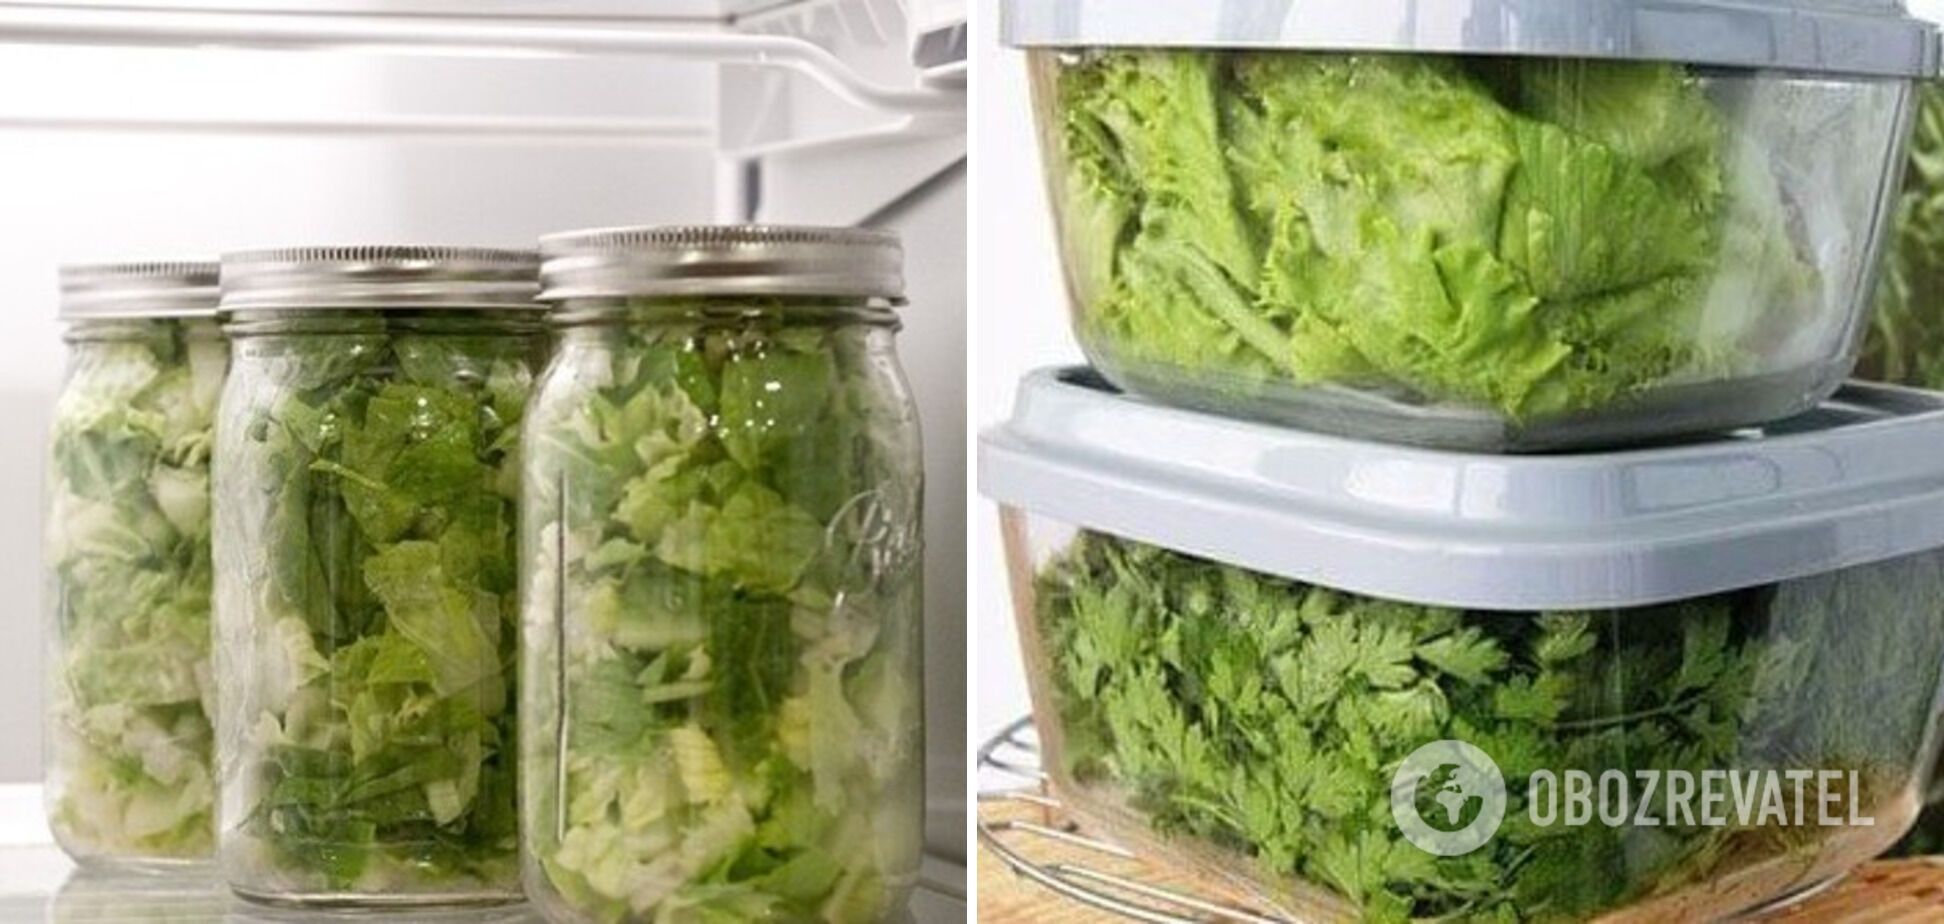 Storage of herbs in glass and plastic containers